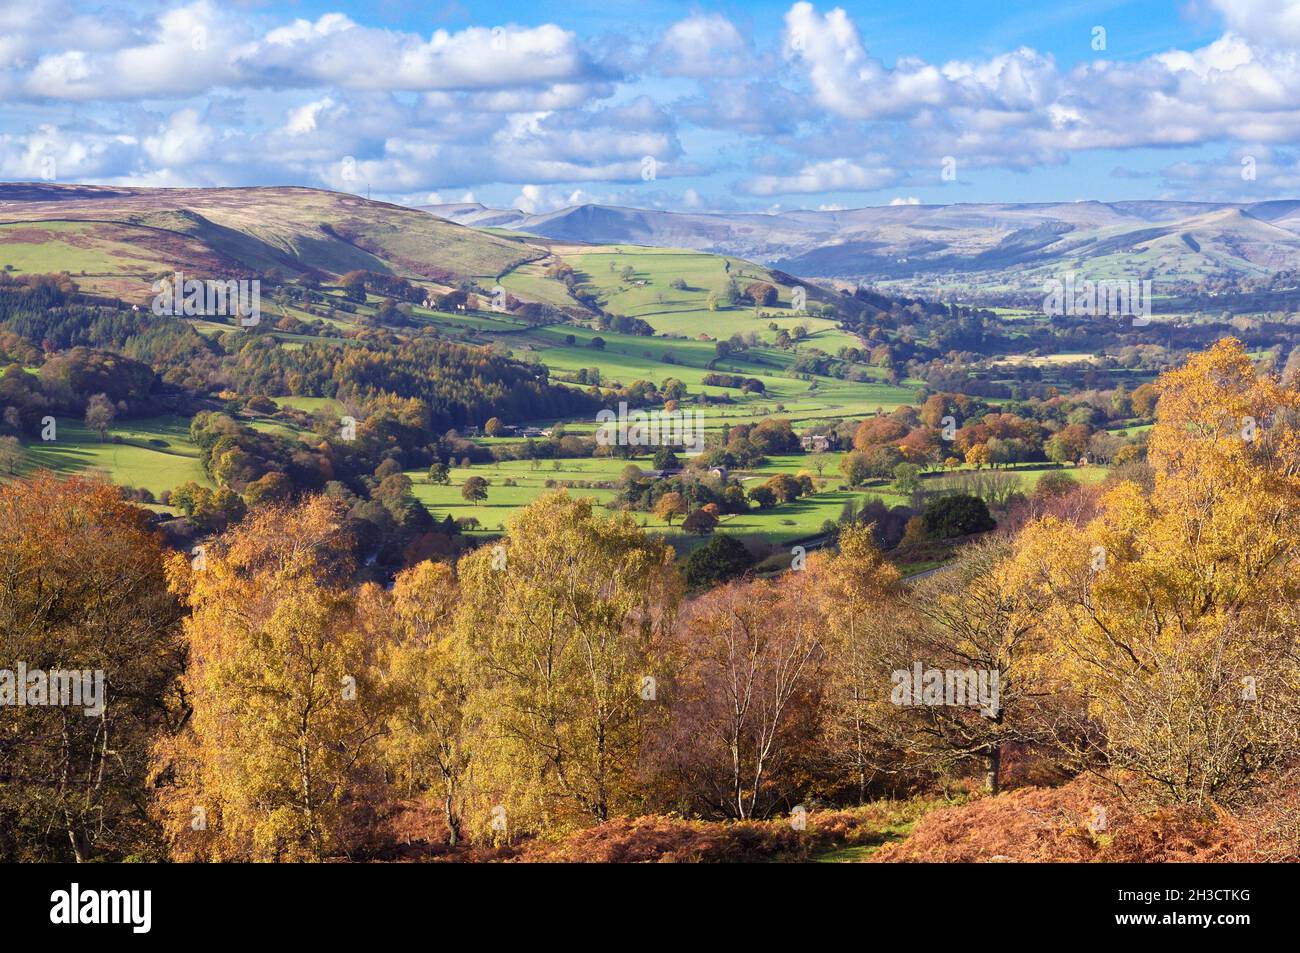 A sunny scenic autumn landscape view from Hathersage towards Hope Valley, Mam Tor and Lose Hill, Peak District National Park, Derbyshire, England, UK Stock Photo